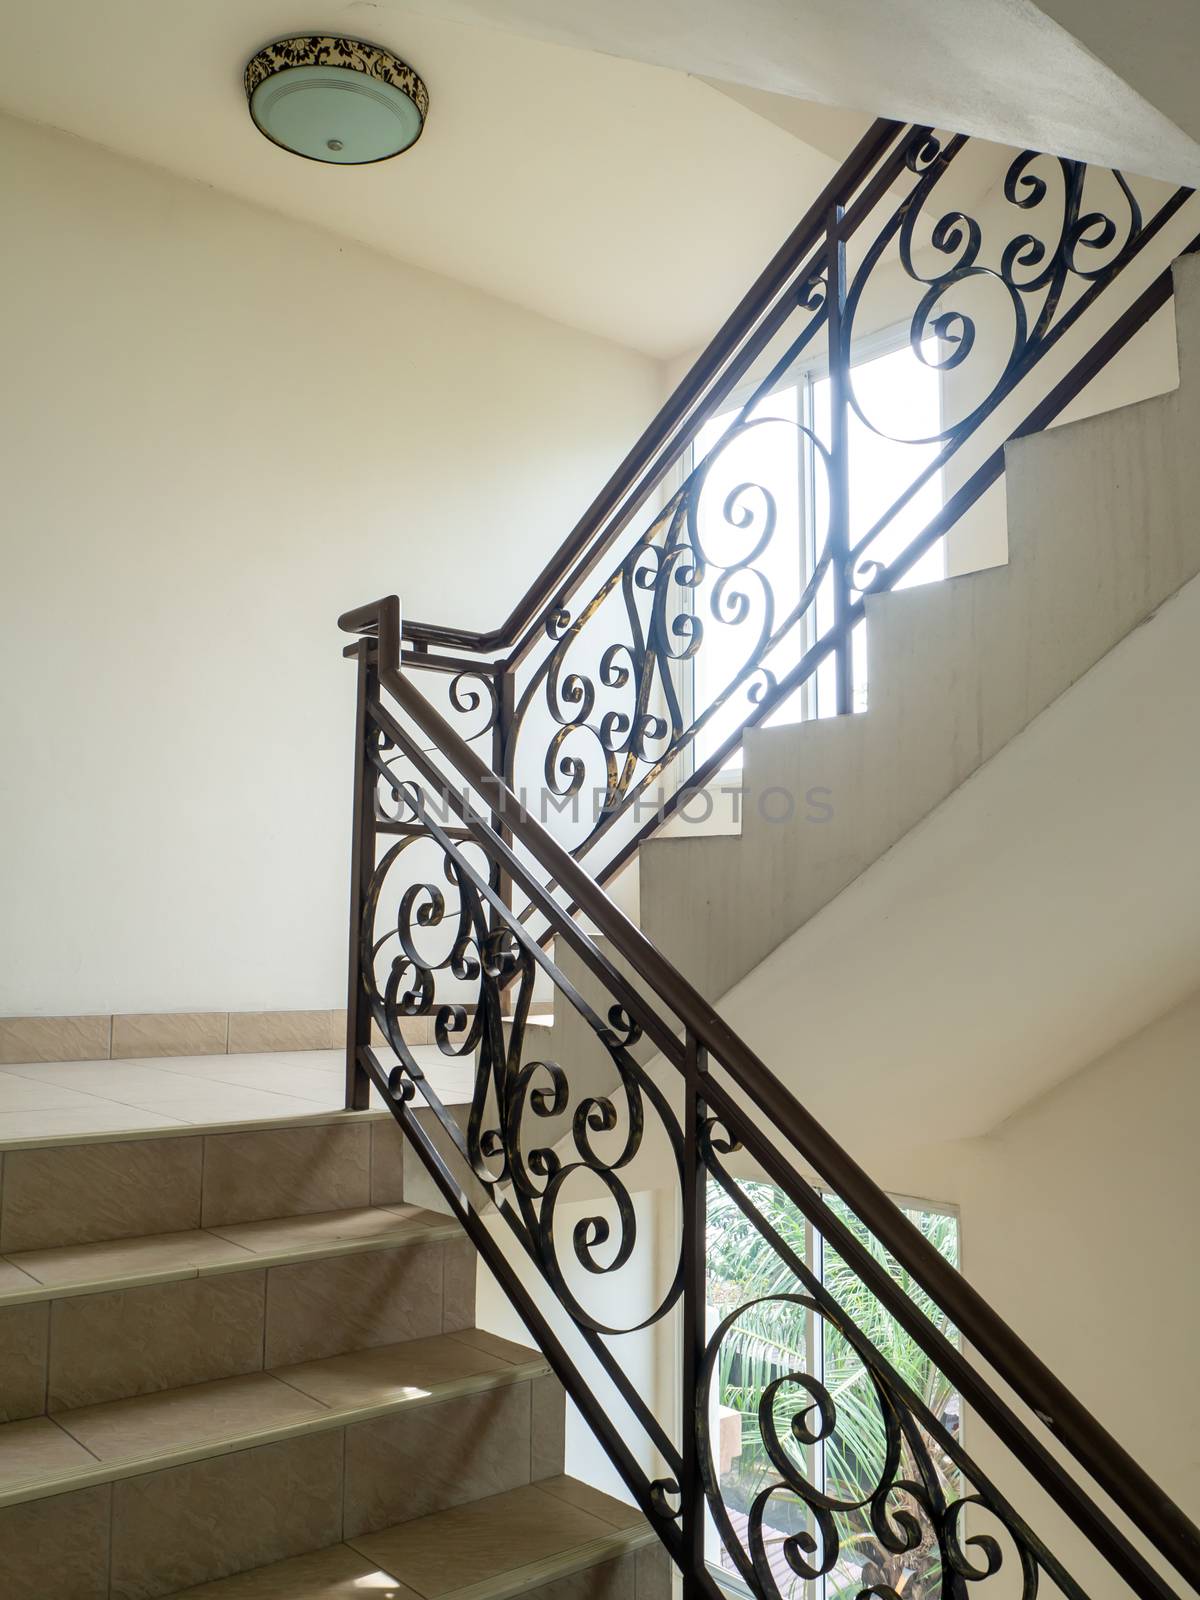 The Marble staircase with stairs in luxury hall